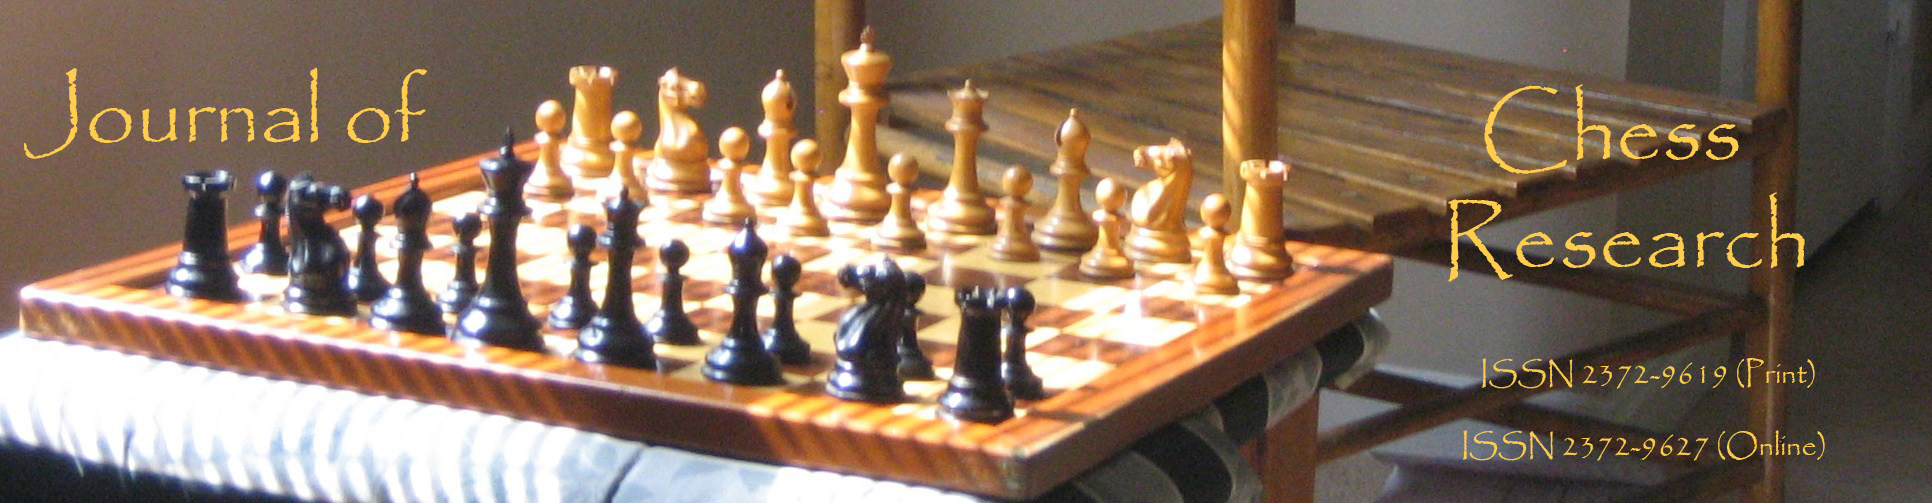 Chessable on X: The Chessable Research Awards support chess research  projects from university-based researchers. Undergraduate and graduate  students from all over the world can apply with new or ongoing research.  Applications from